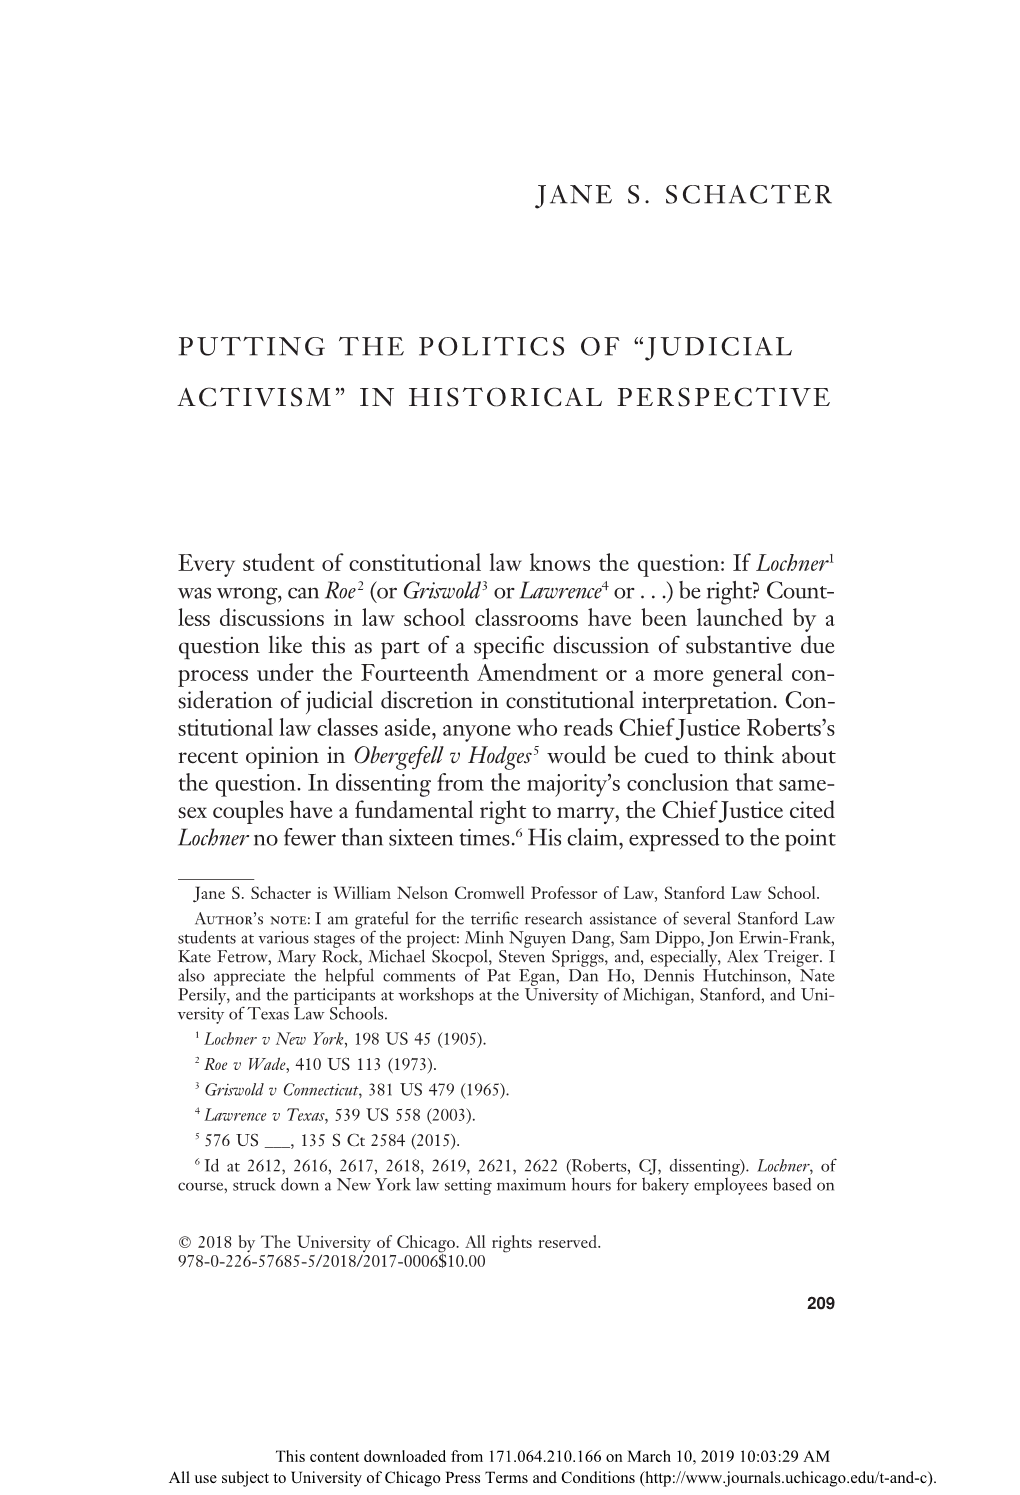 Putting the Politics of “Judicial Activism” in Historical Perspective